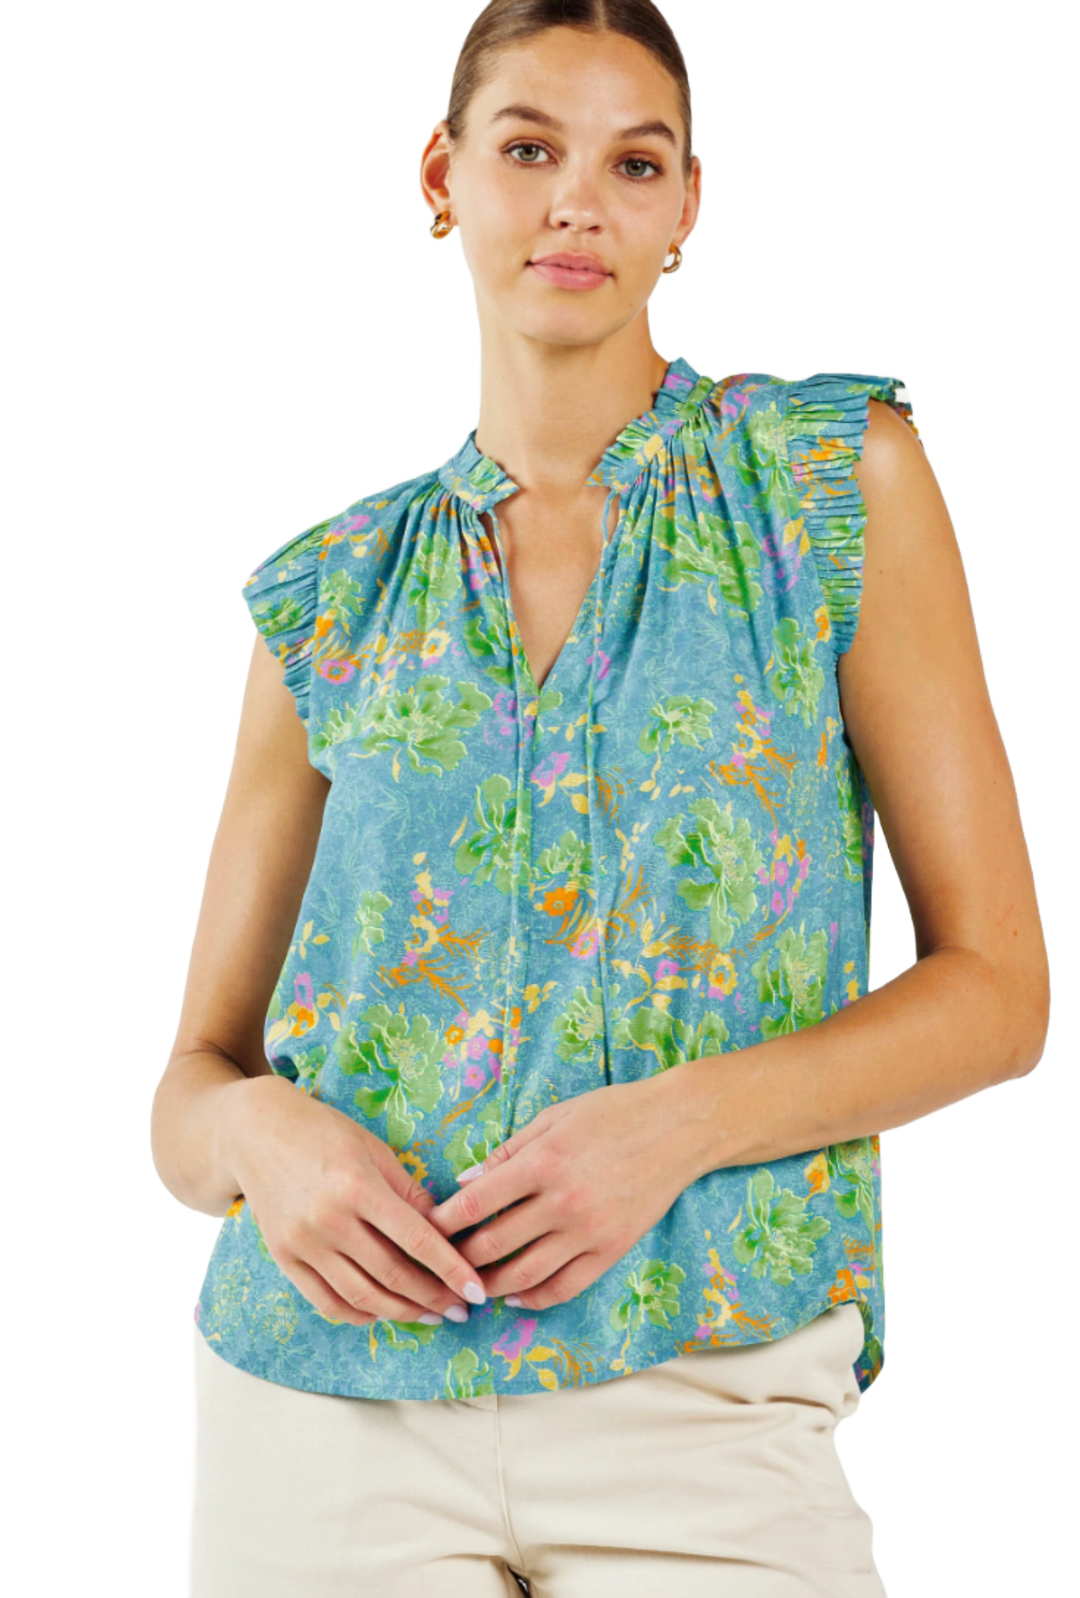 The Leanna Blouse- Blue and green multi